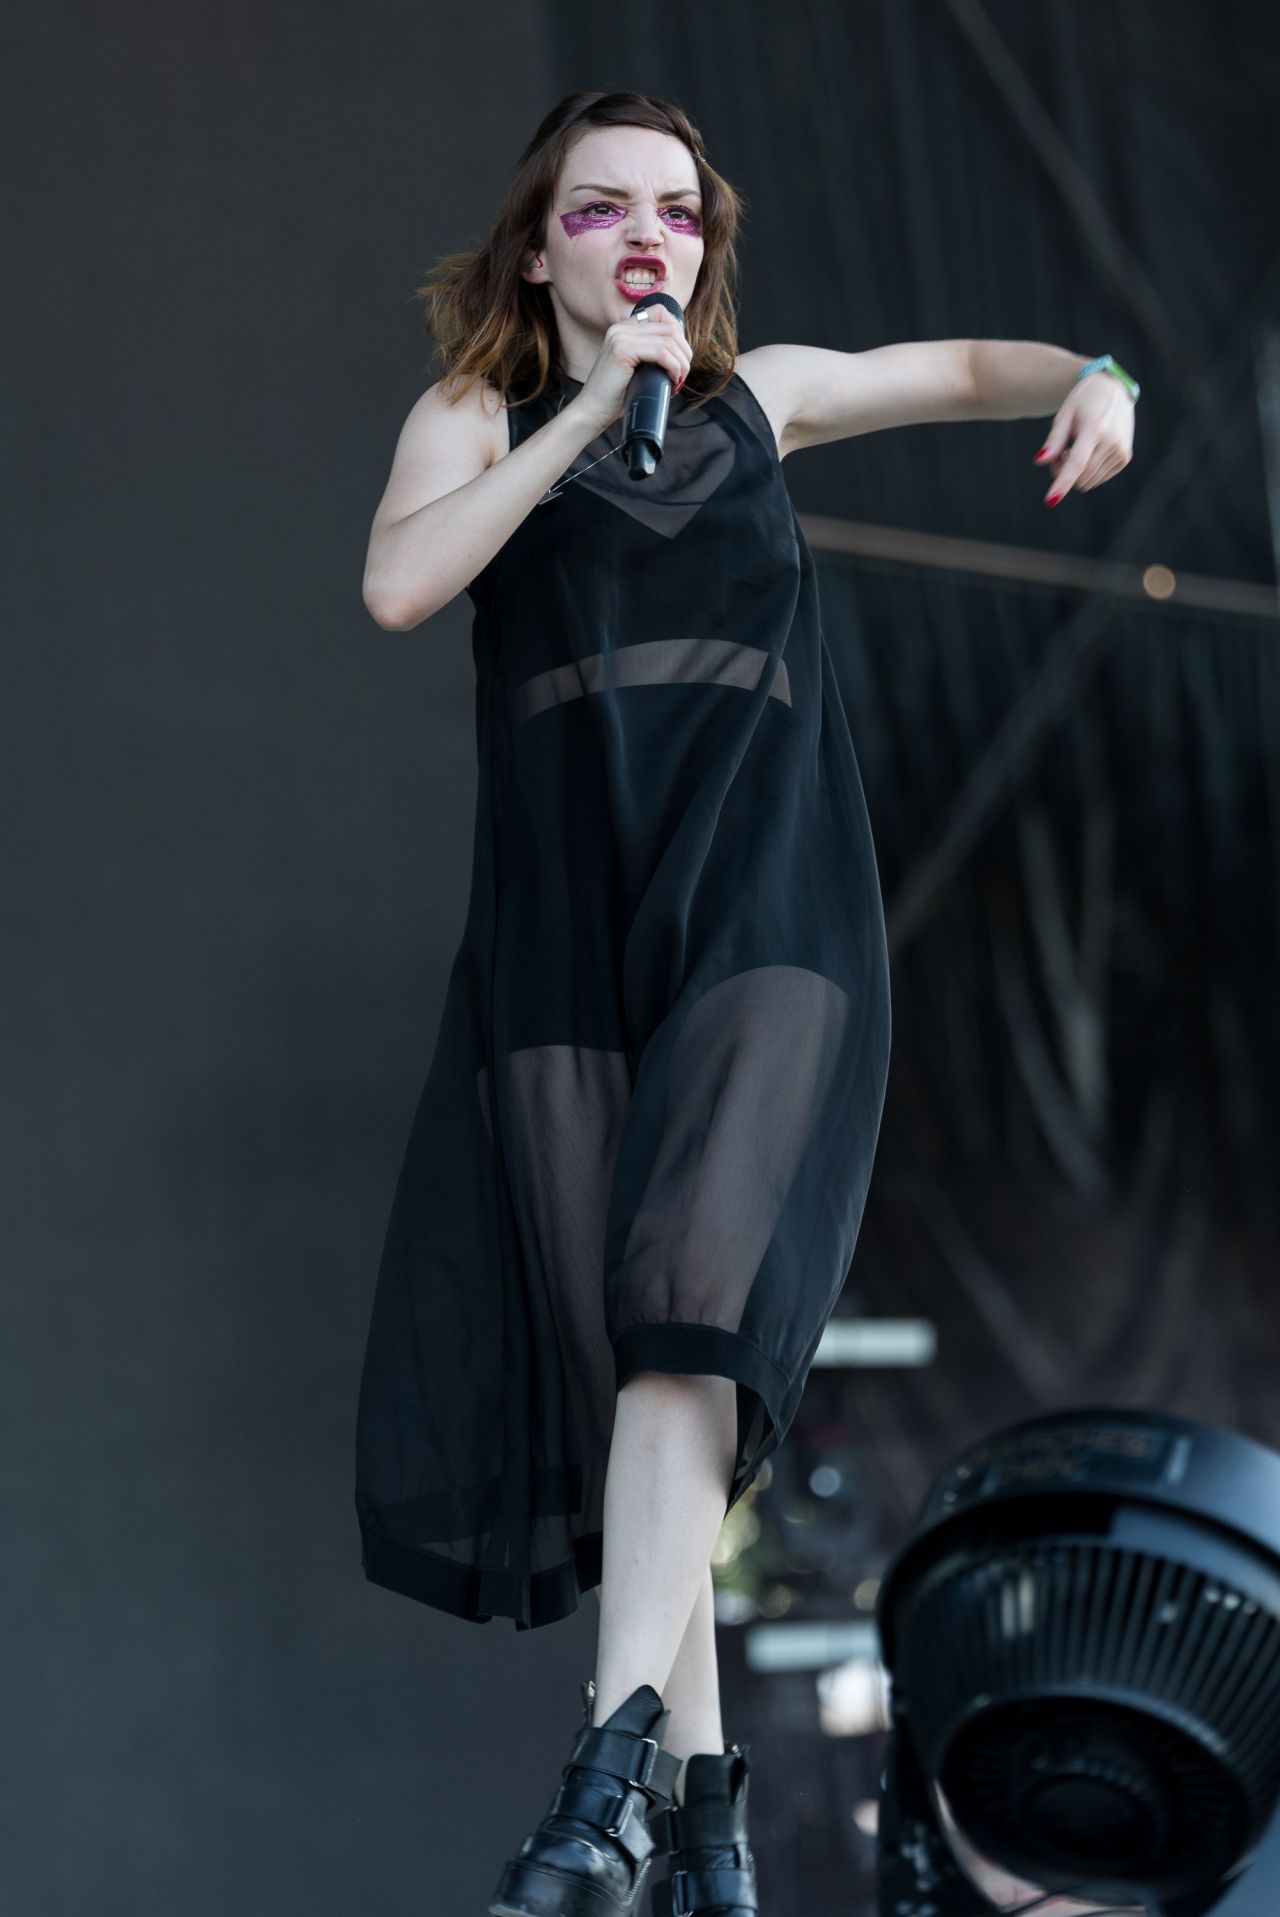 Lauren Mayberry – Performs at 2016 Bonnaroo Music Fest in Manchester